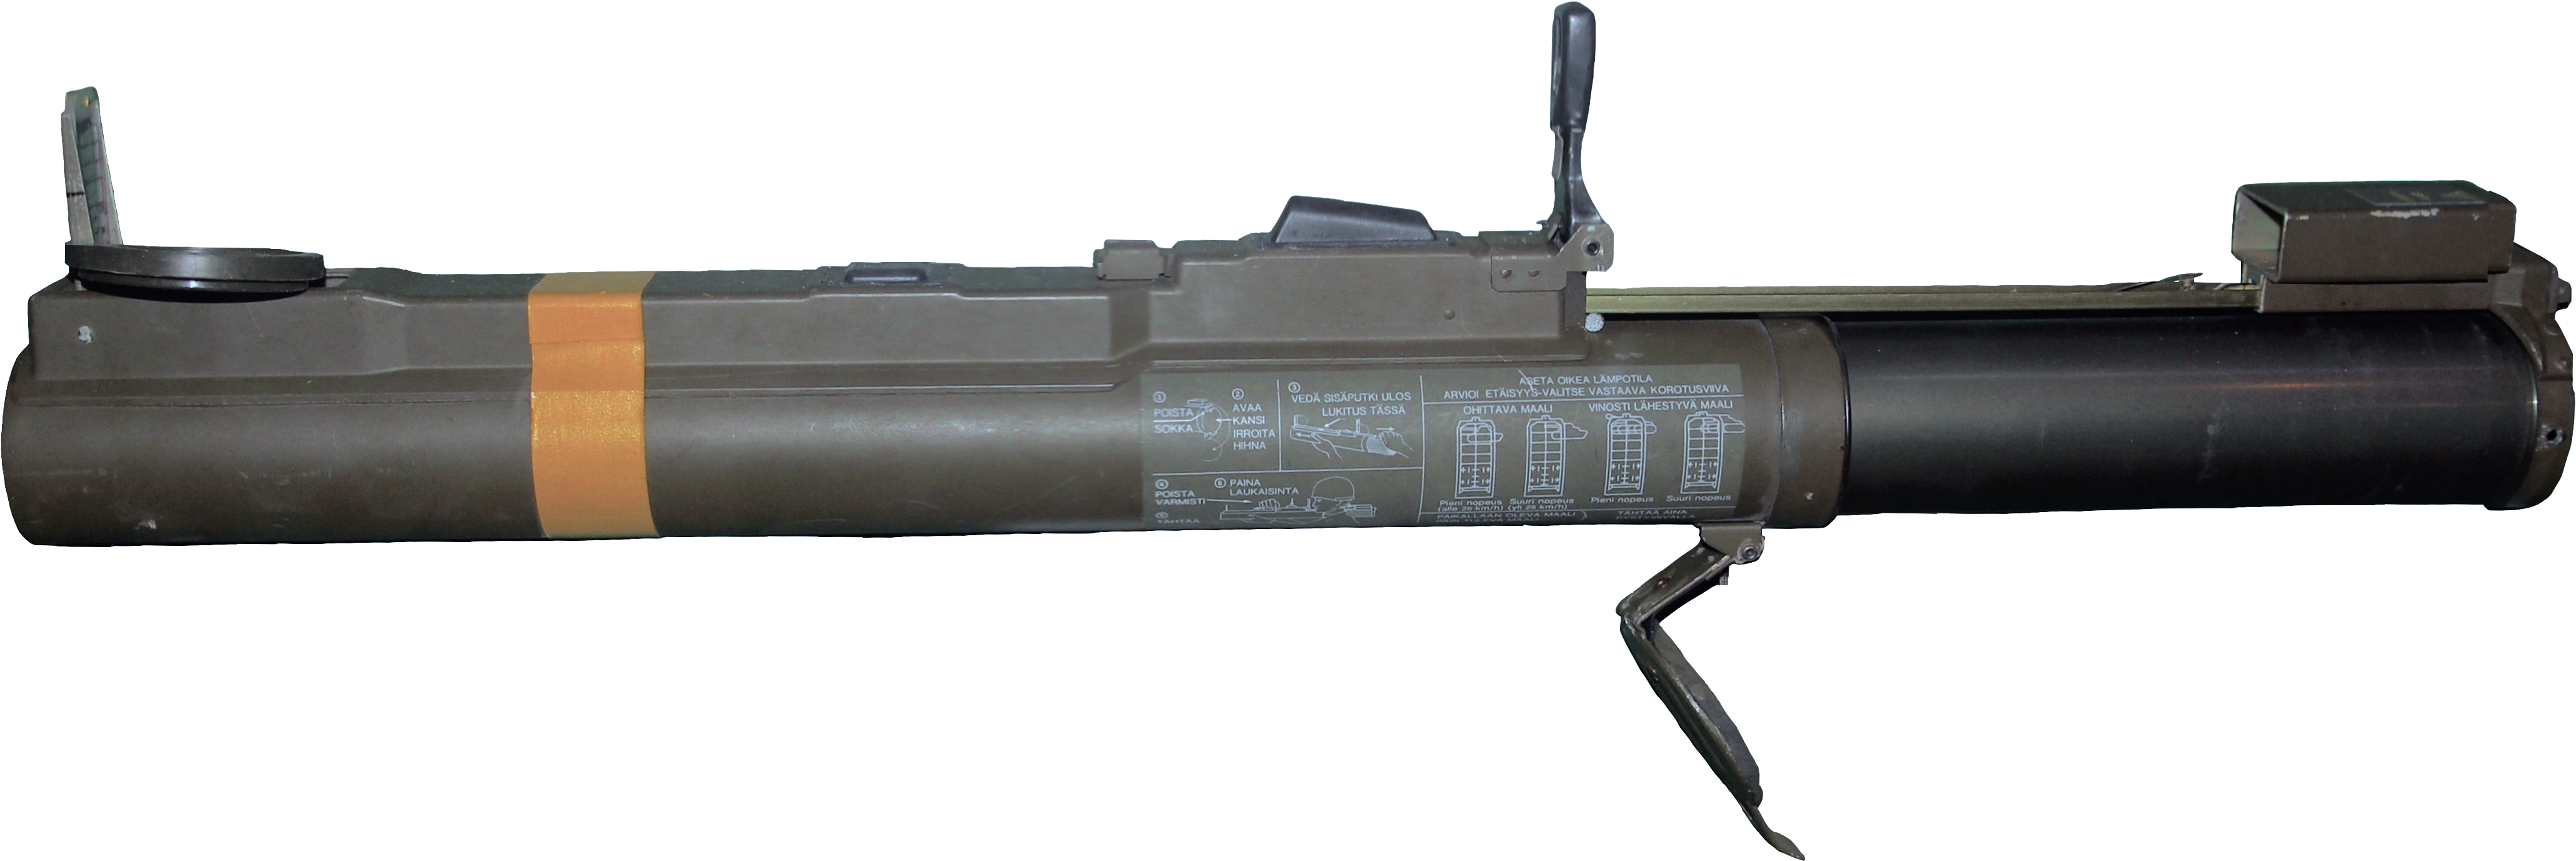 M72a2 Law - Papua New Guinea (4152x1450), Png Download